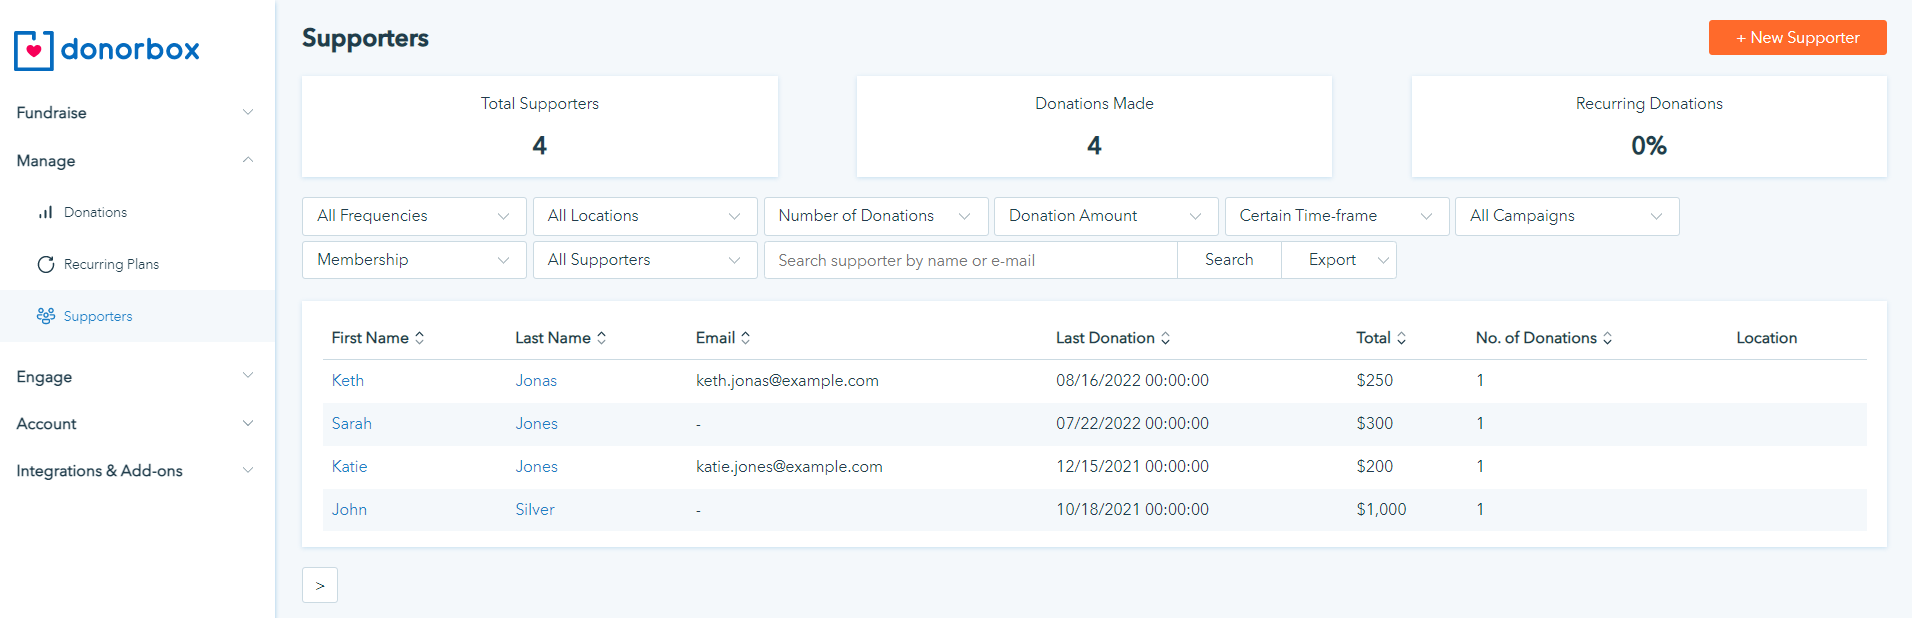 Screenshot showing Donorbox's donor management supporter database. 